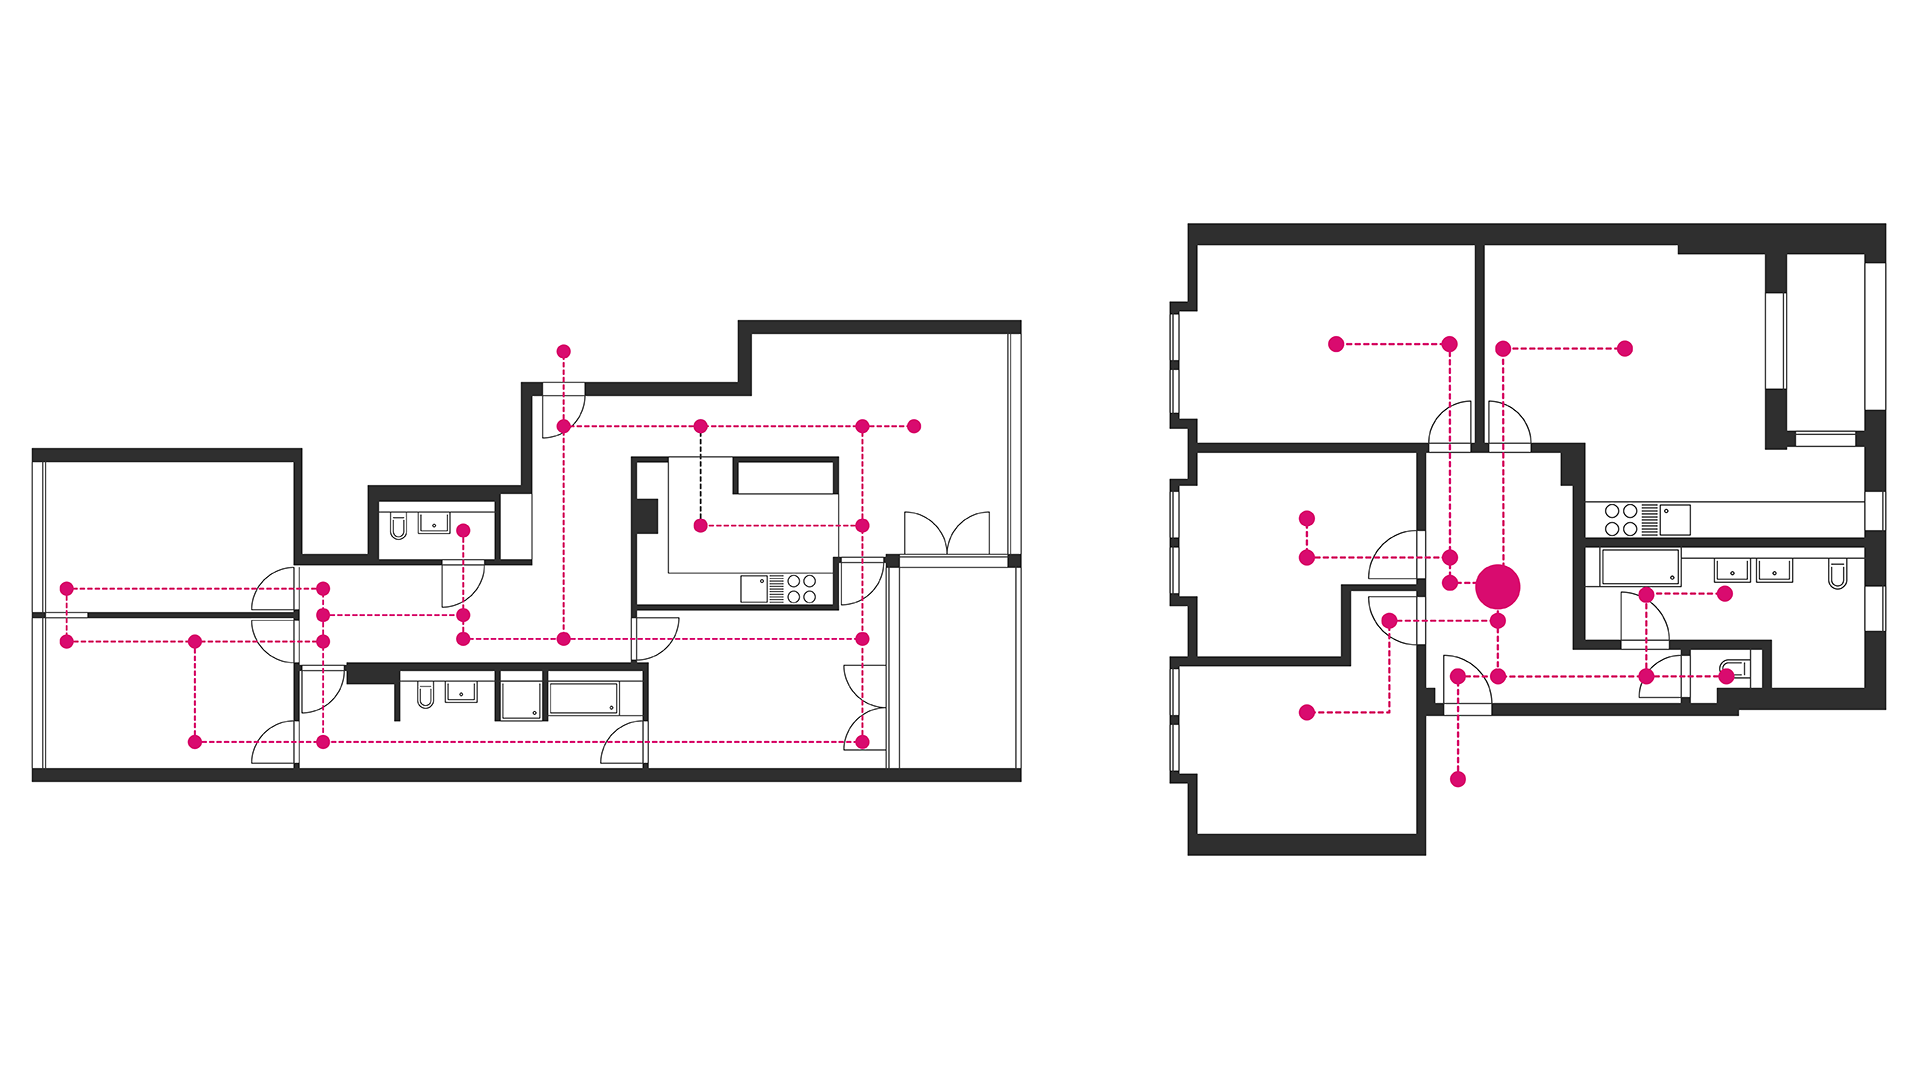 Connectivity determines the utilization of the floor plan 